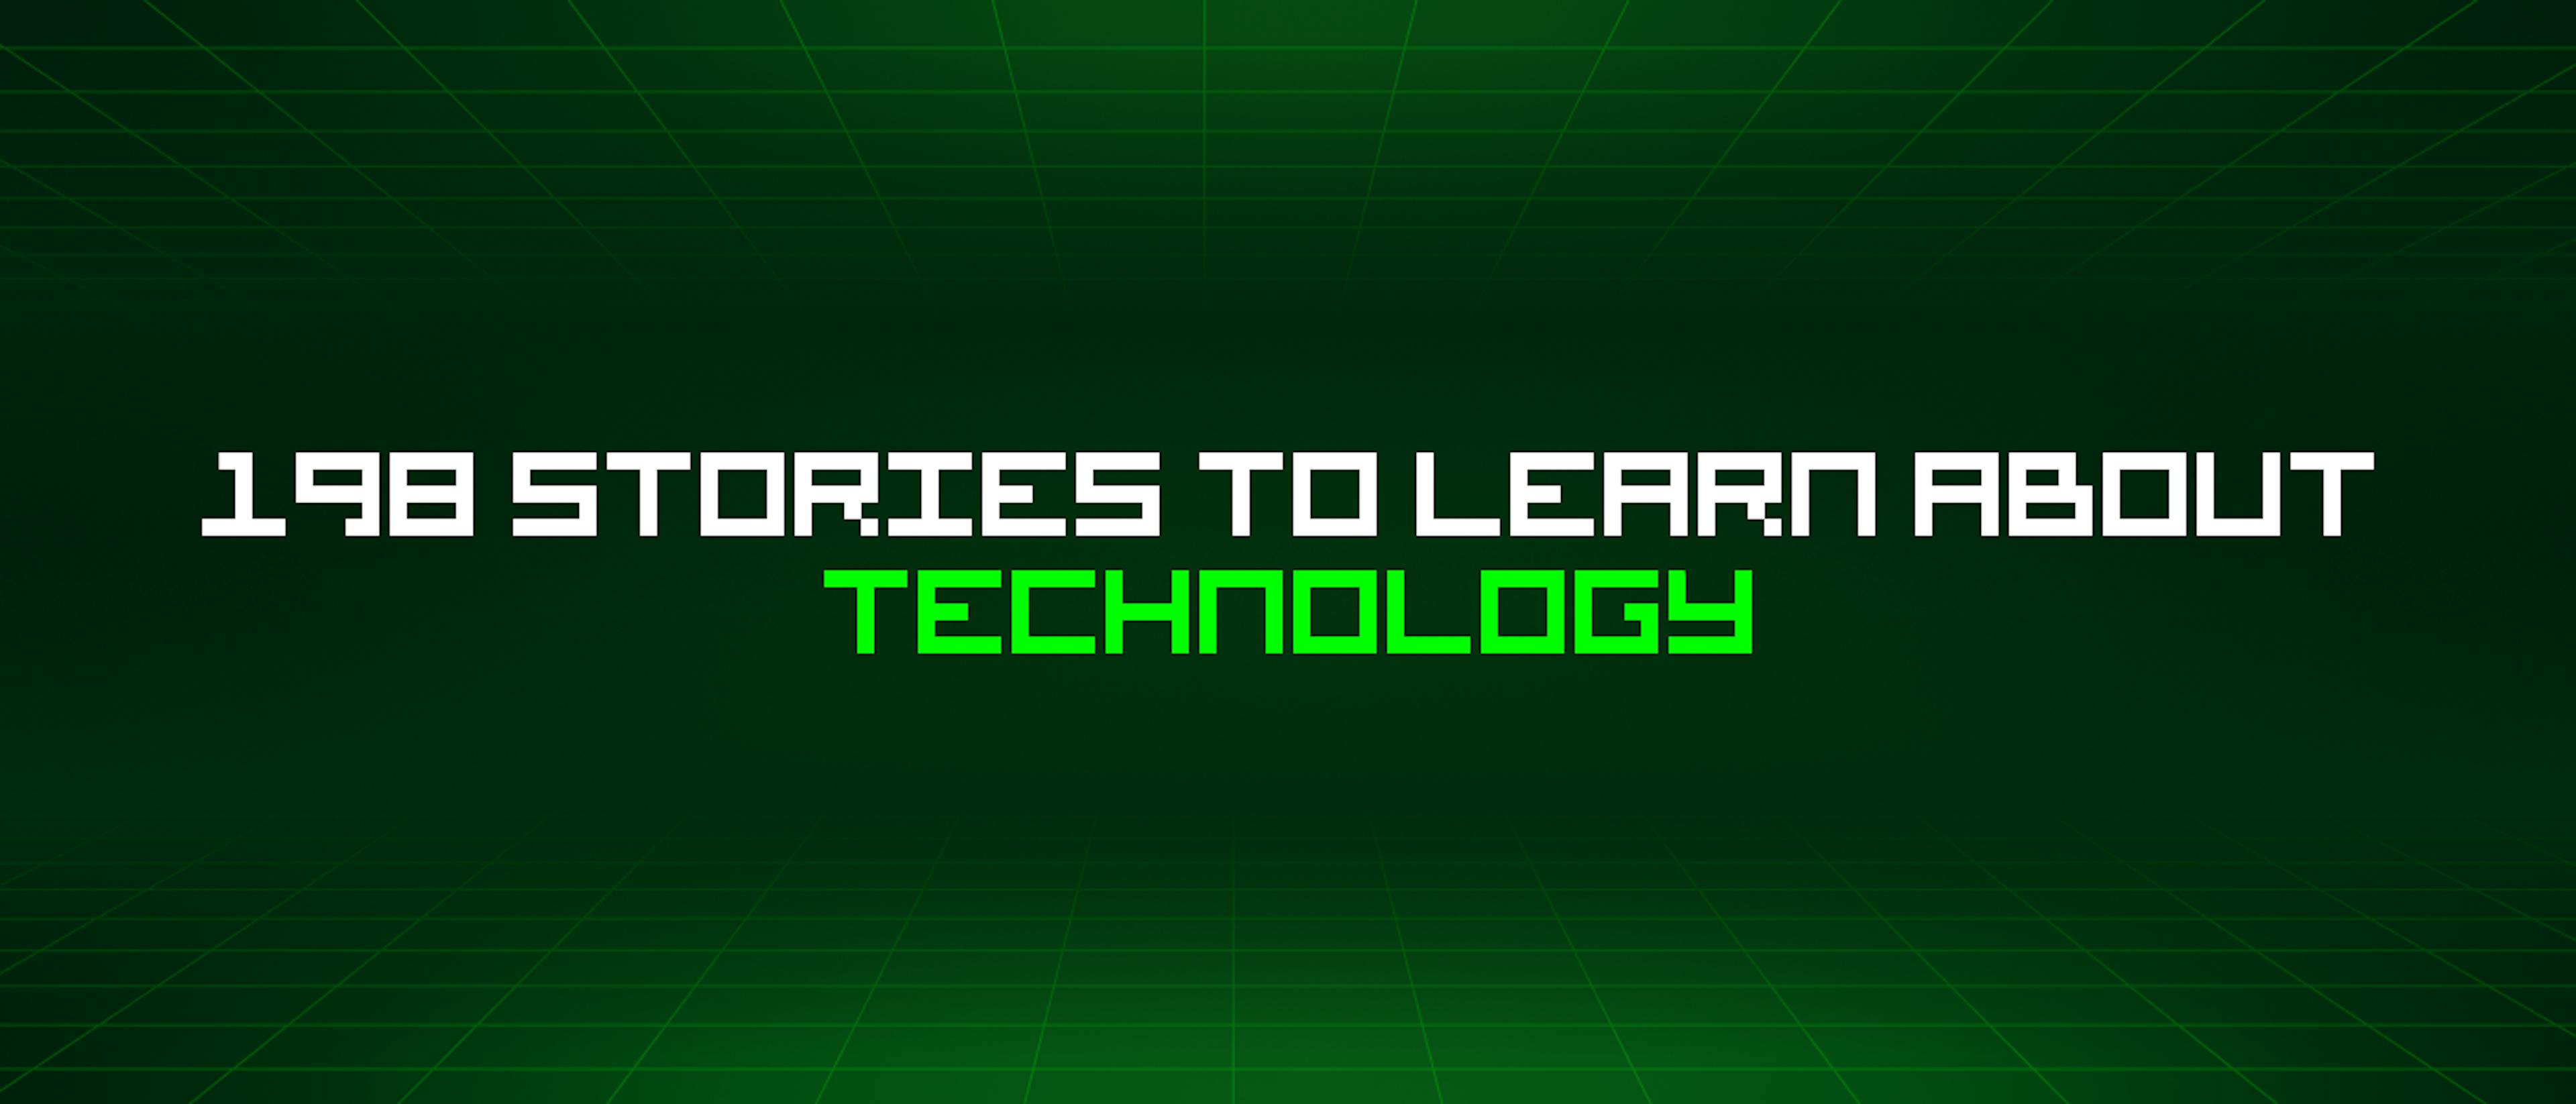 featured image - 198 Stories To Learn About Technology